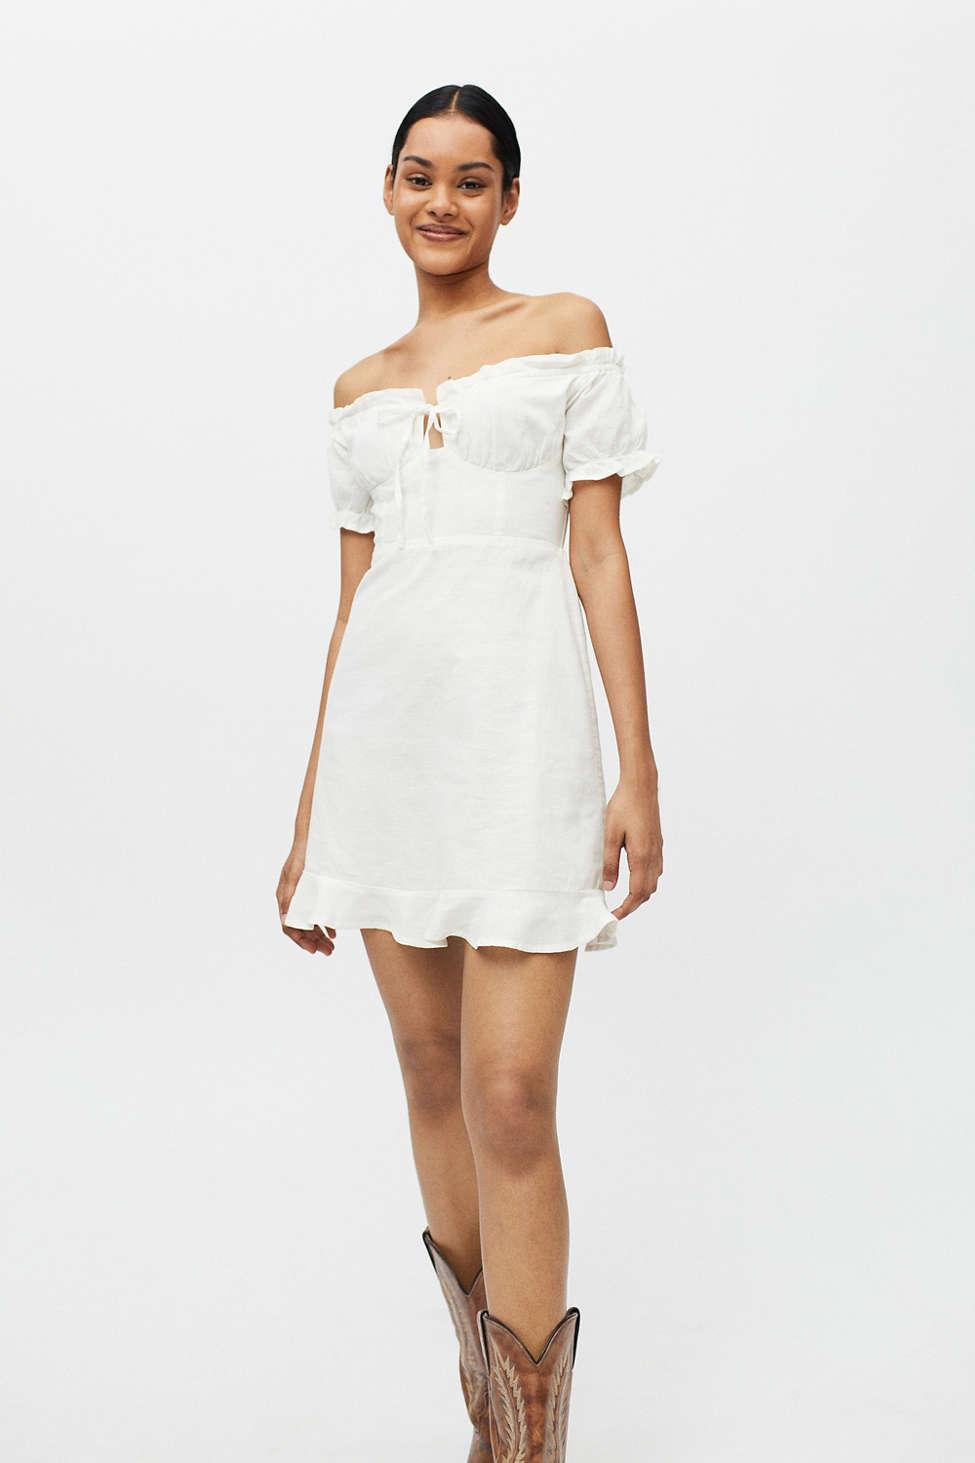 urban outfitters white dress